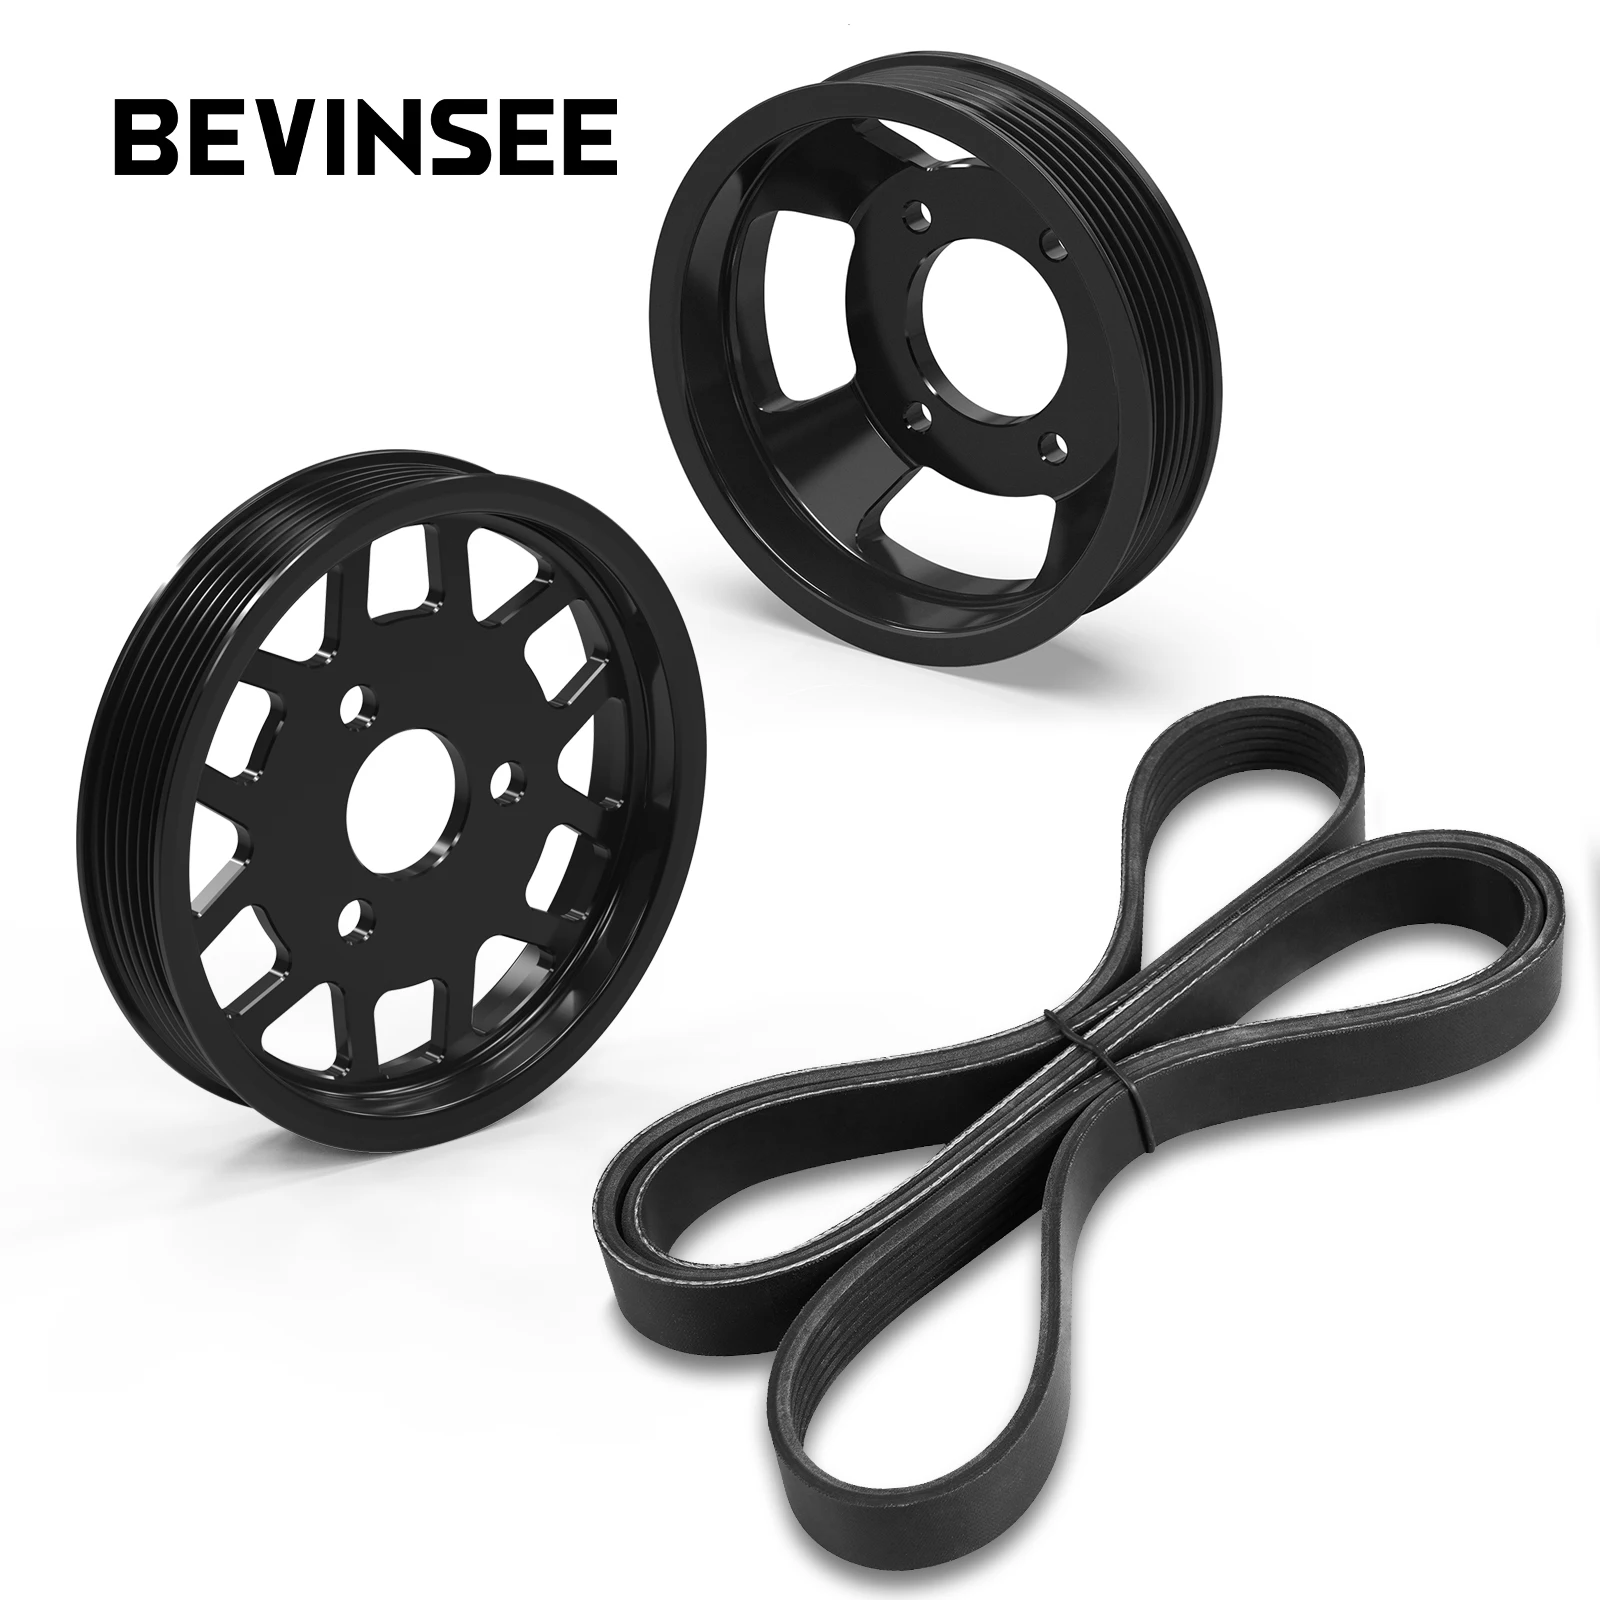 

BEVINSEE Water Pump Pulley & Power Steering Pump Pulley for BMW E46 E39 E38 E83 X3 E53 X5 M52TU M54 Engine